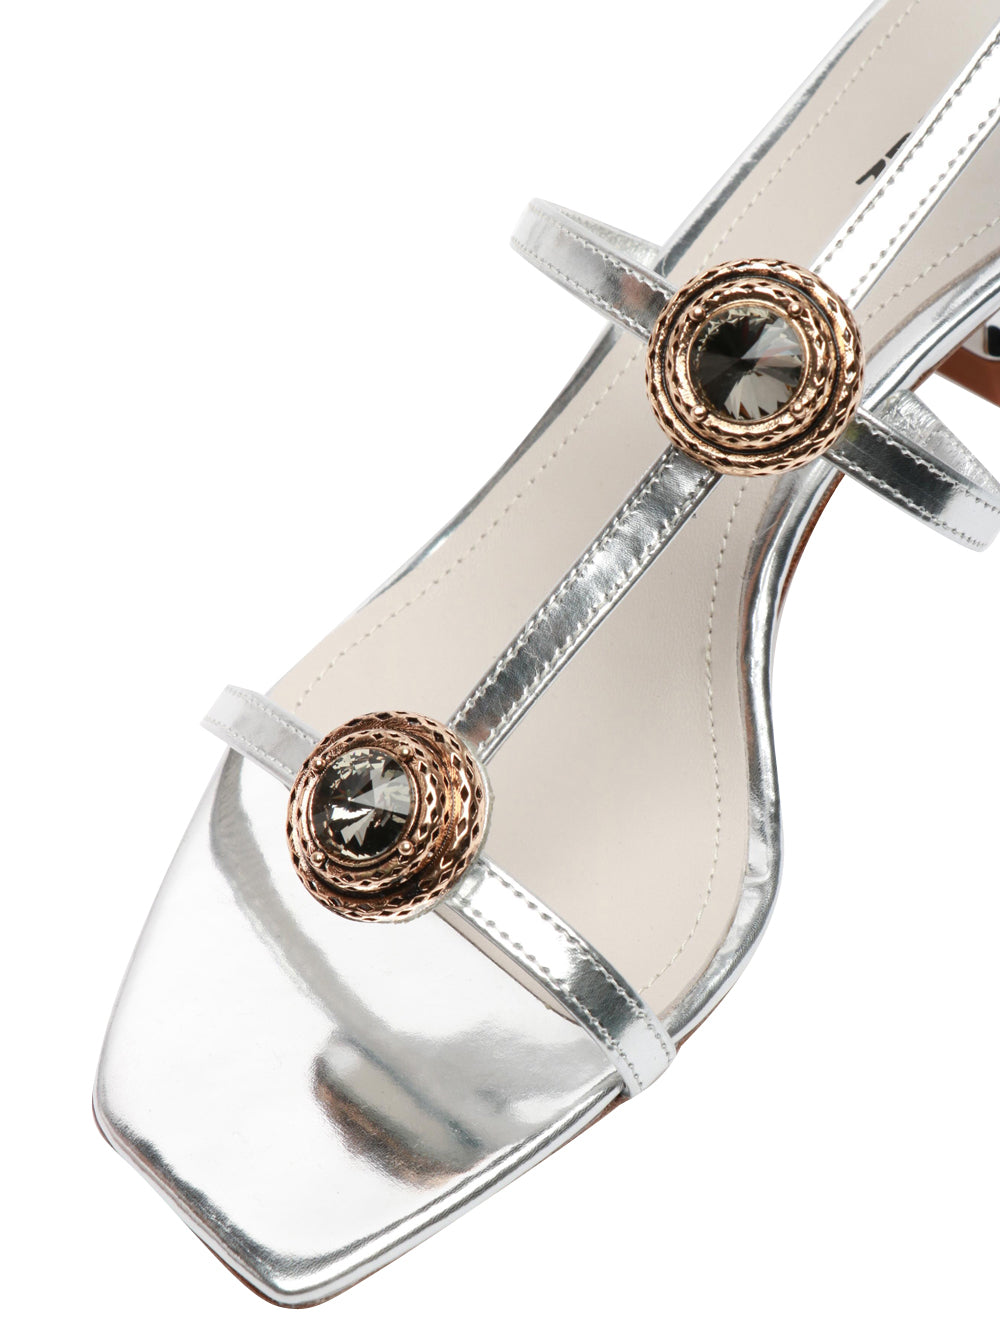 Lia Sandals in Silver Laminated Leather with Heel and Stones